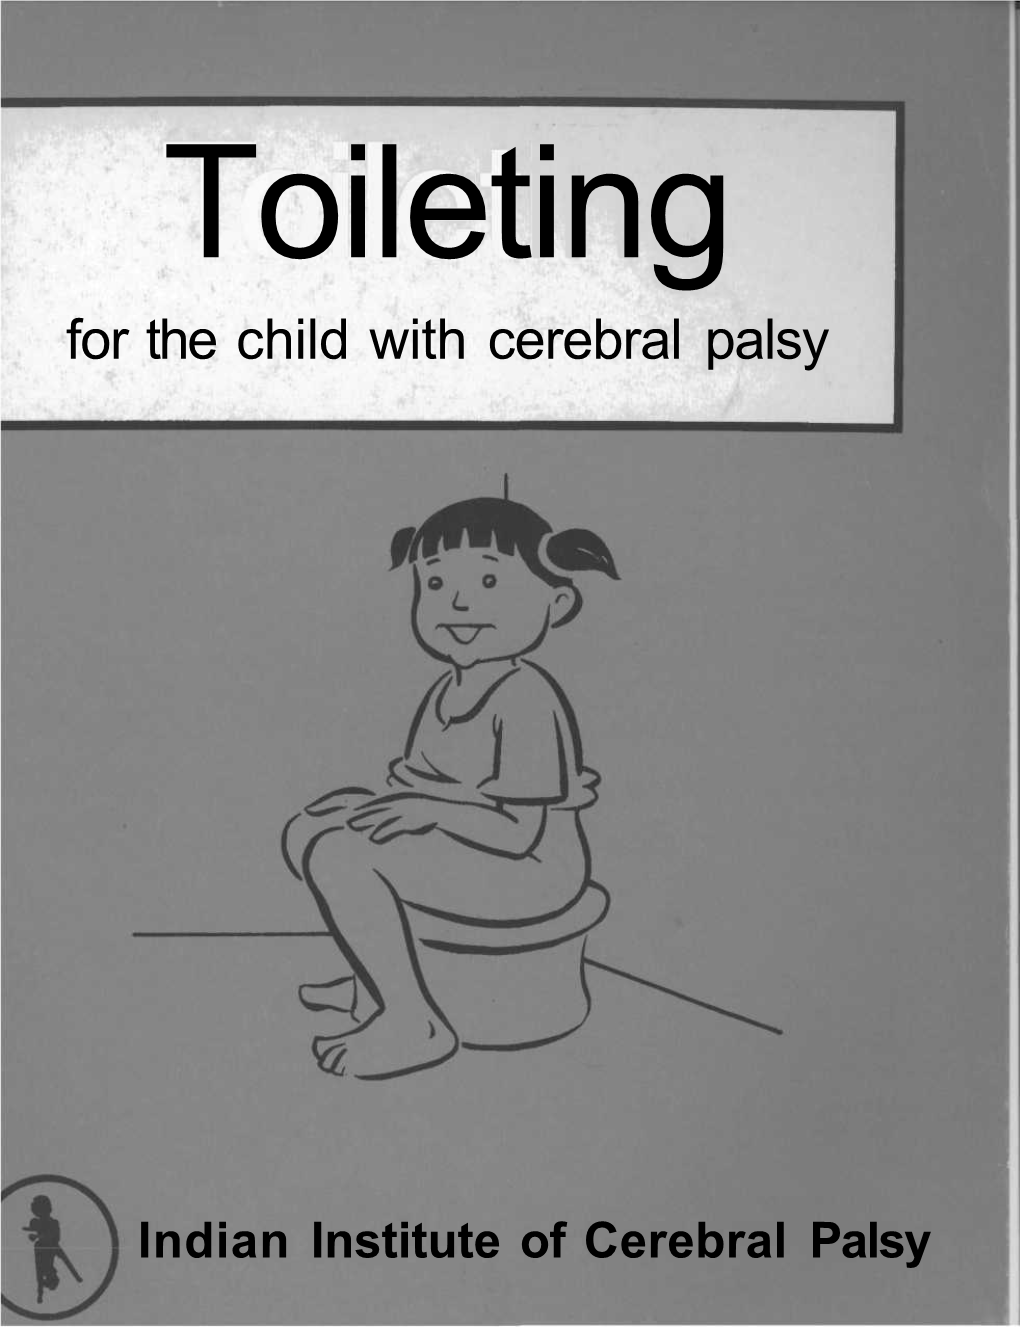 Toileting for the Child with Cerebral Palsy